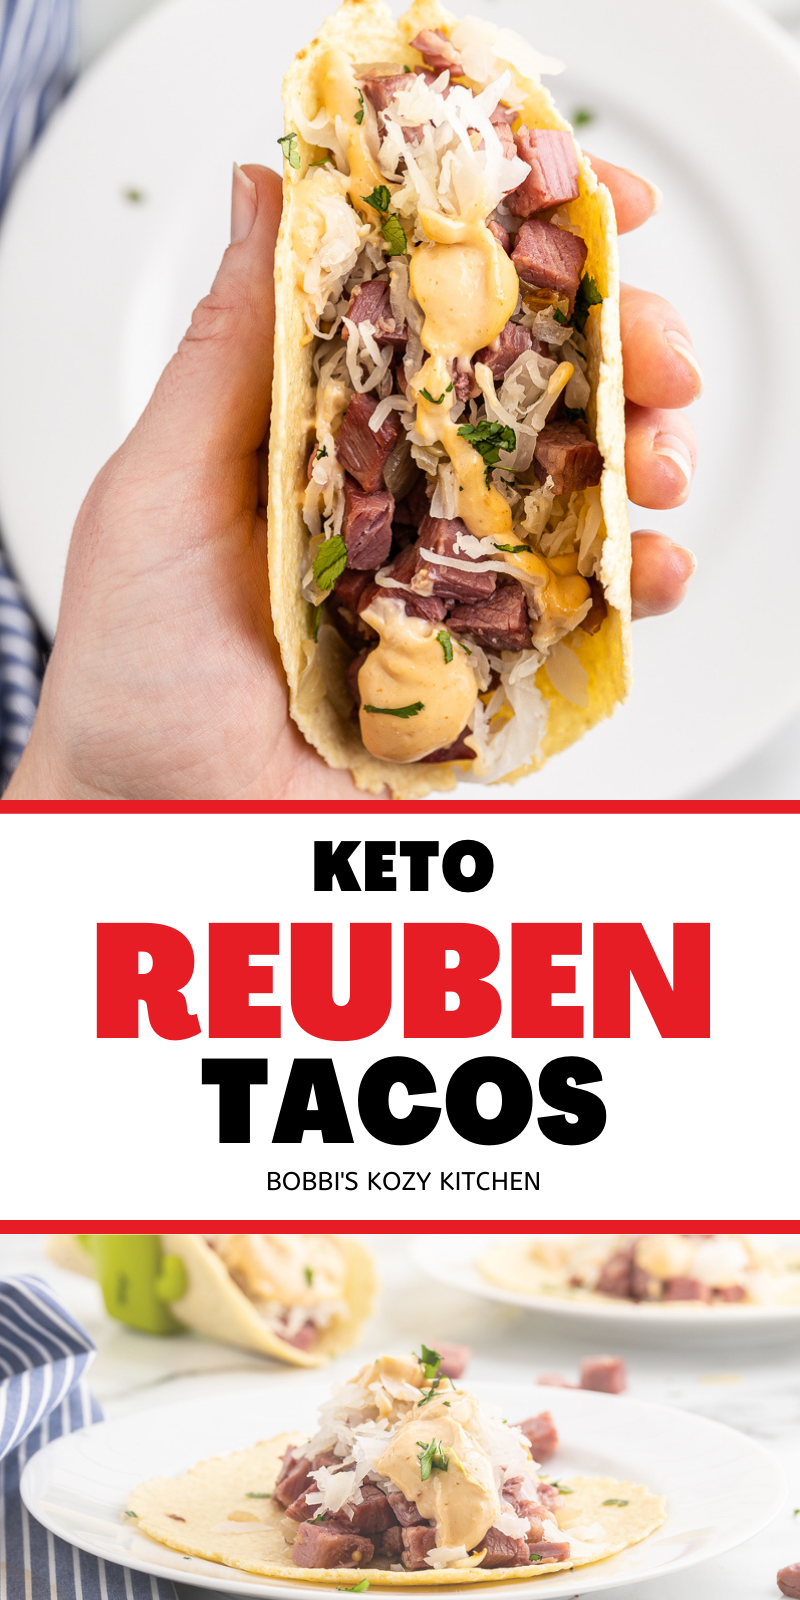 Keto Reuben Tacos - These keto tacos are a great way to change up your St Patrick's Day menu, or a fun way to use up leftover corned beef. They are low carb and gluten-free with less than 3 net carbs per taco. #keto #lowcarb #glutenfree #cornedbeef #reuben #tacos #beef